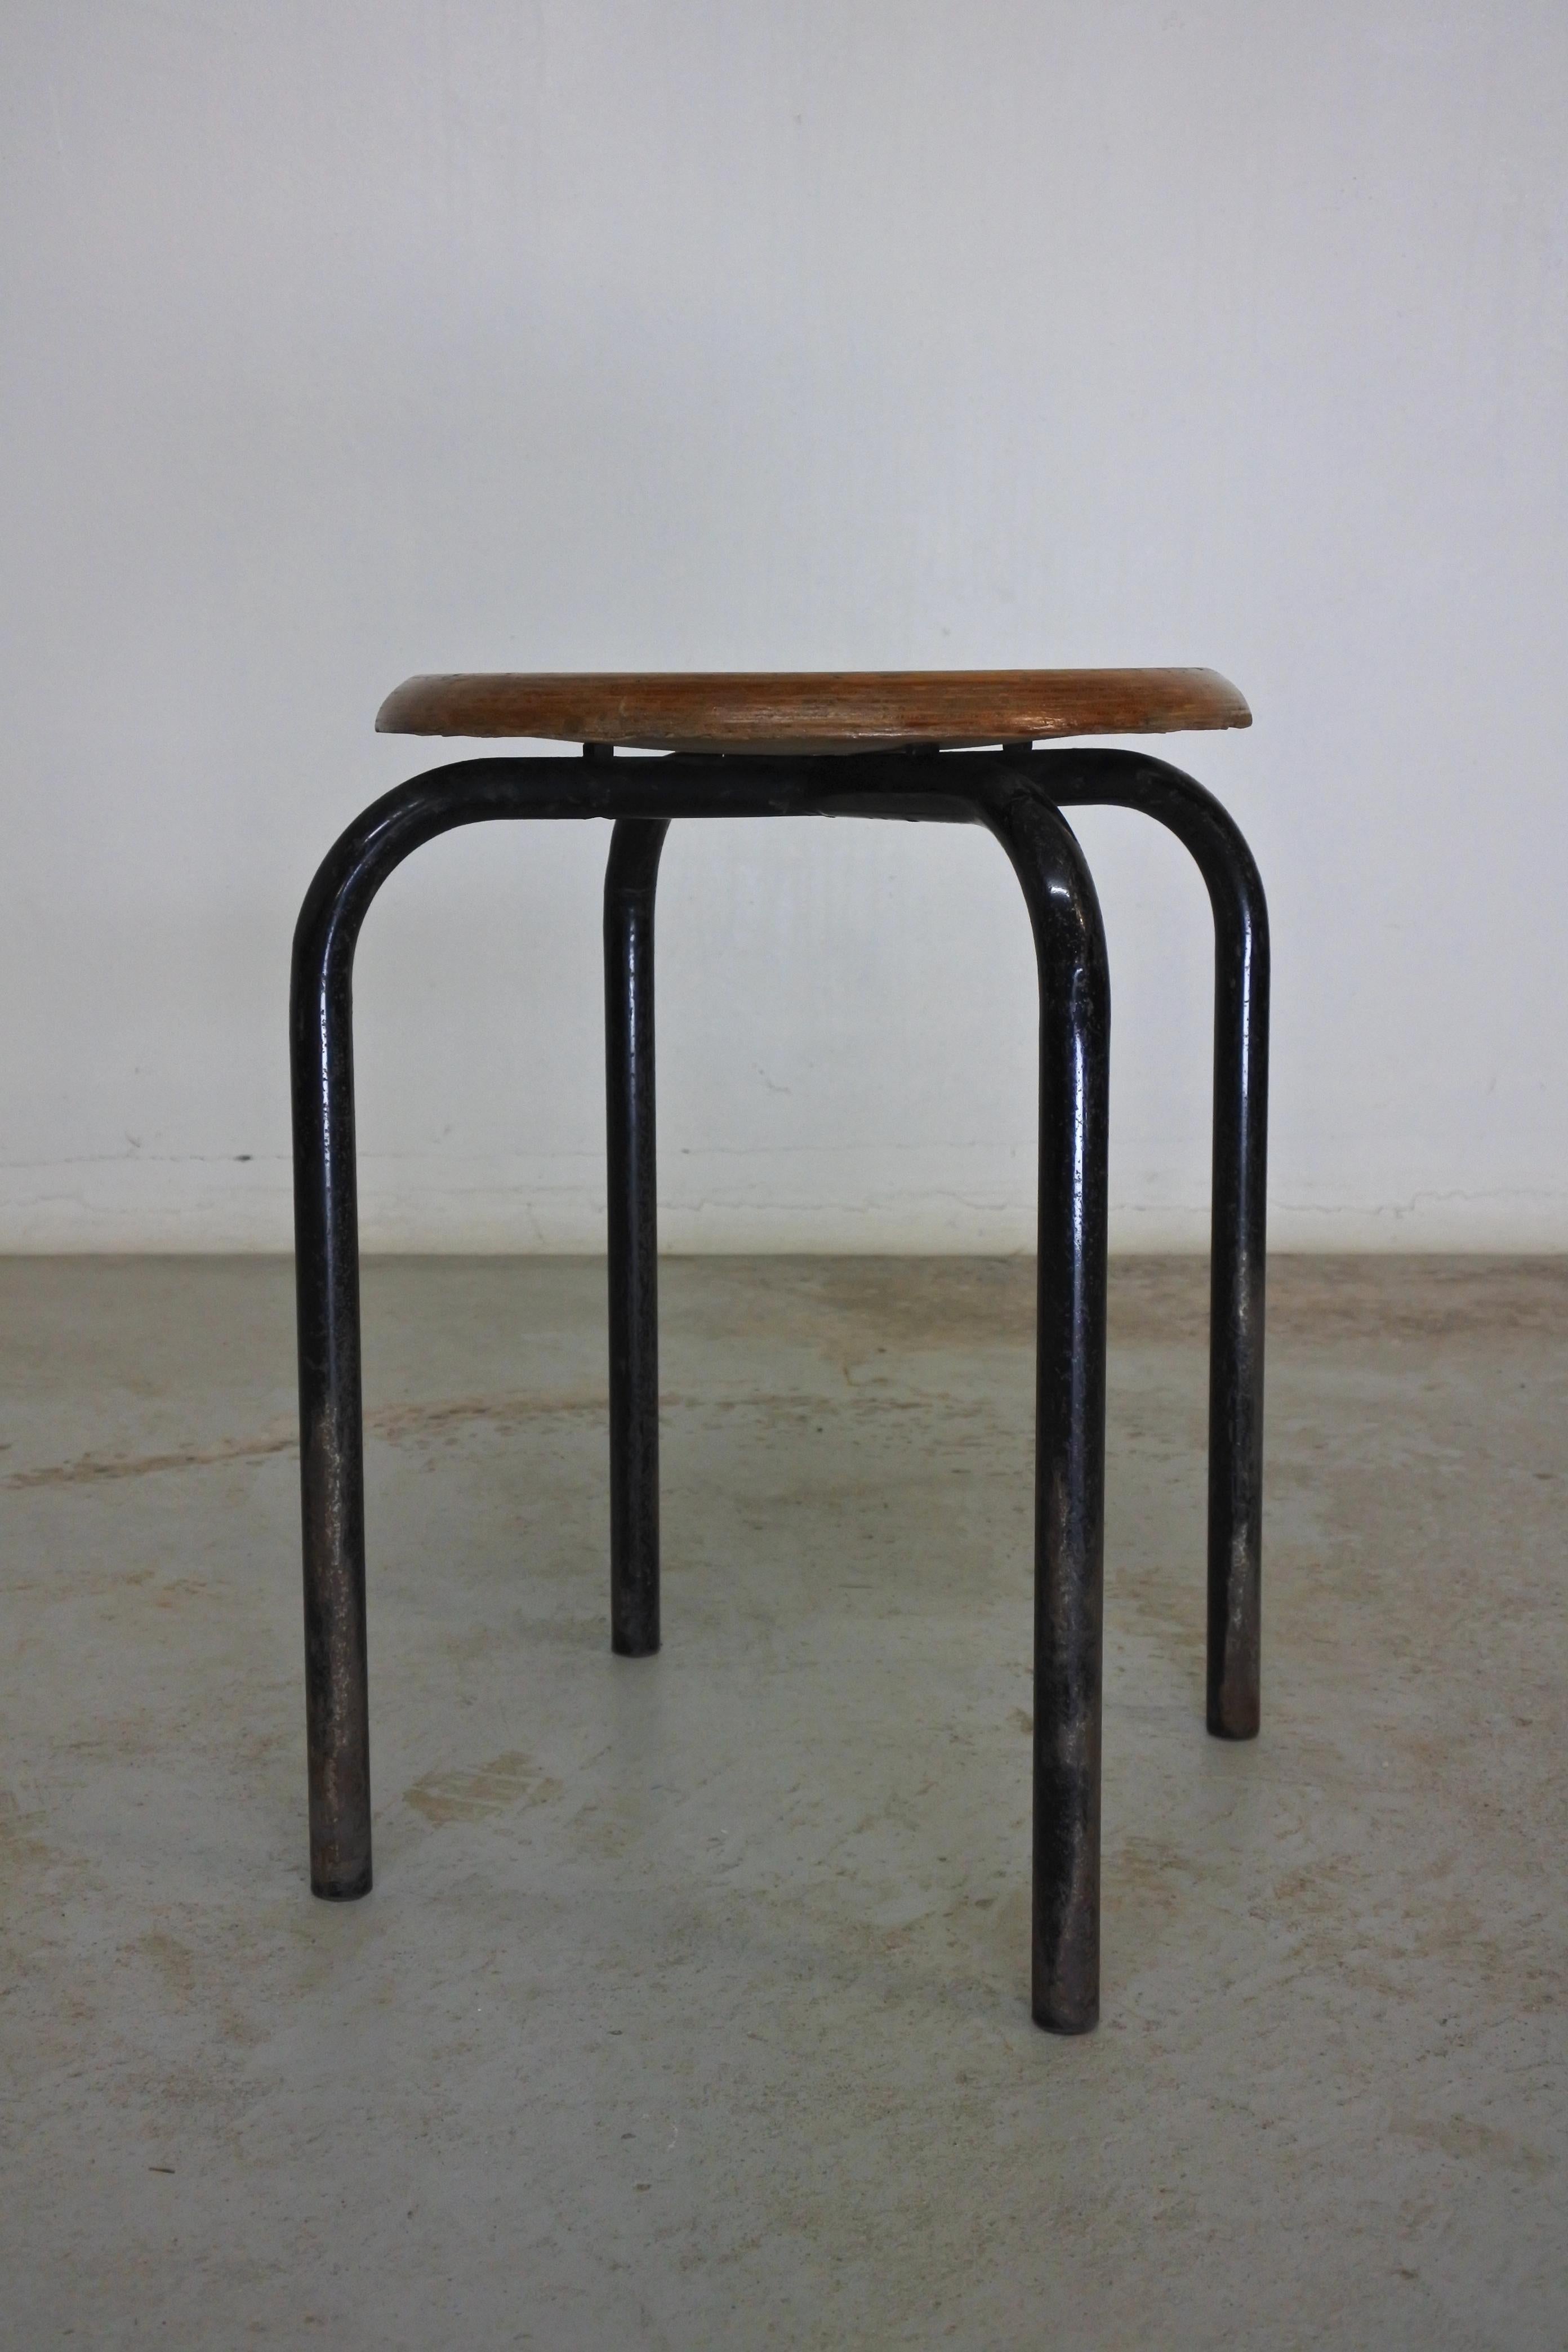 French Mid-Century Modern Wood & Metal Stool Attr. to Atelier Jean Prouve, France 1950s